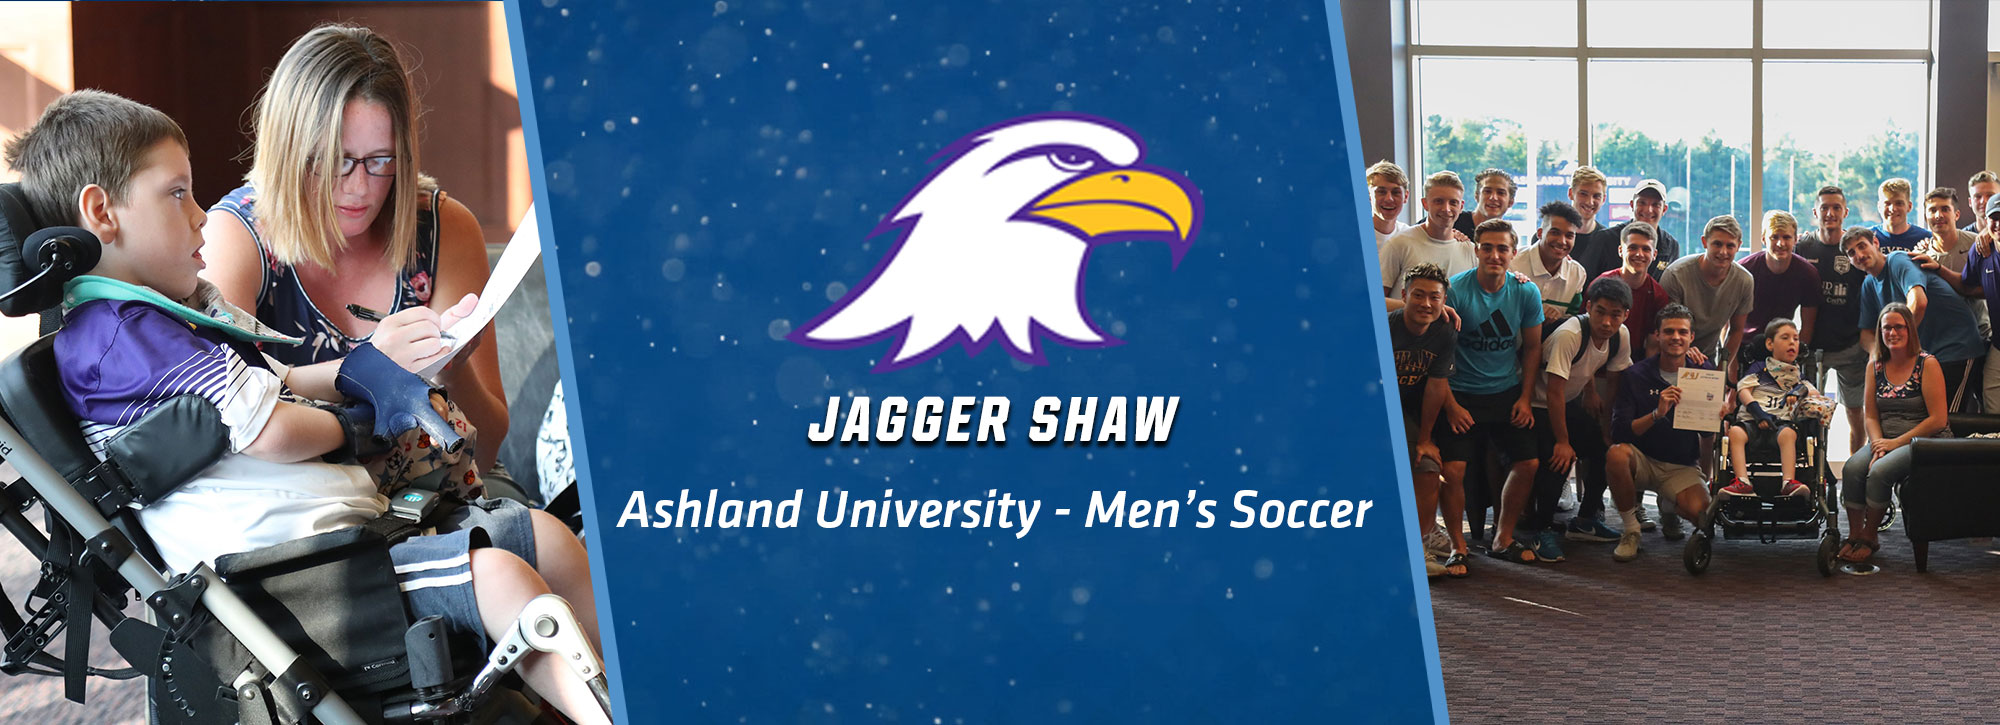 Ashland Men's Soccer Signs Jagger Shaw From Team Impact